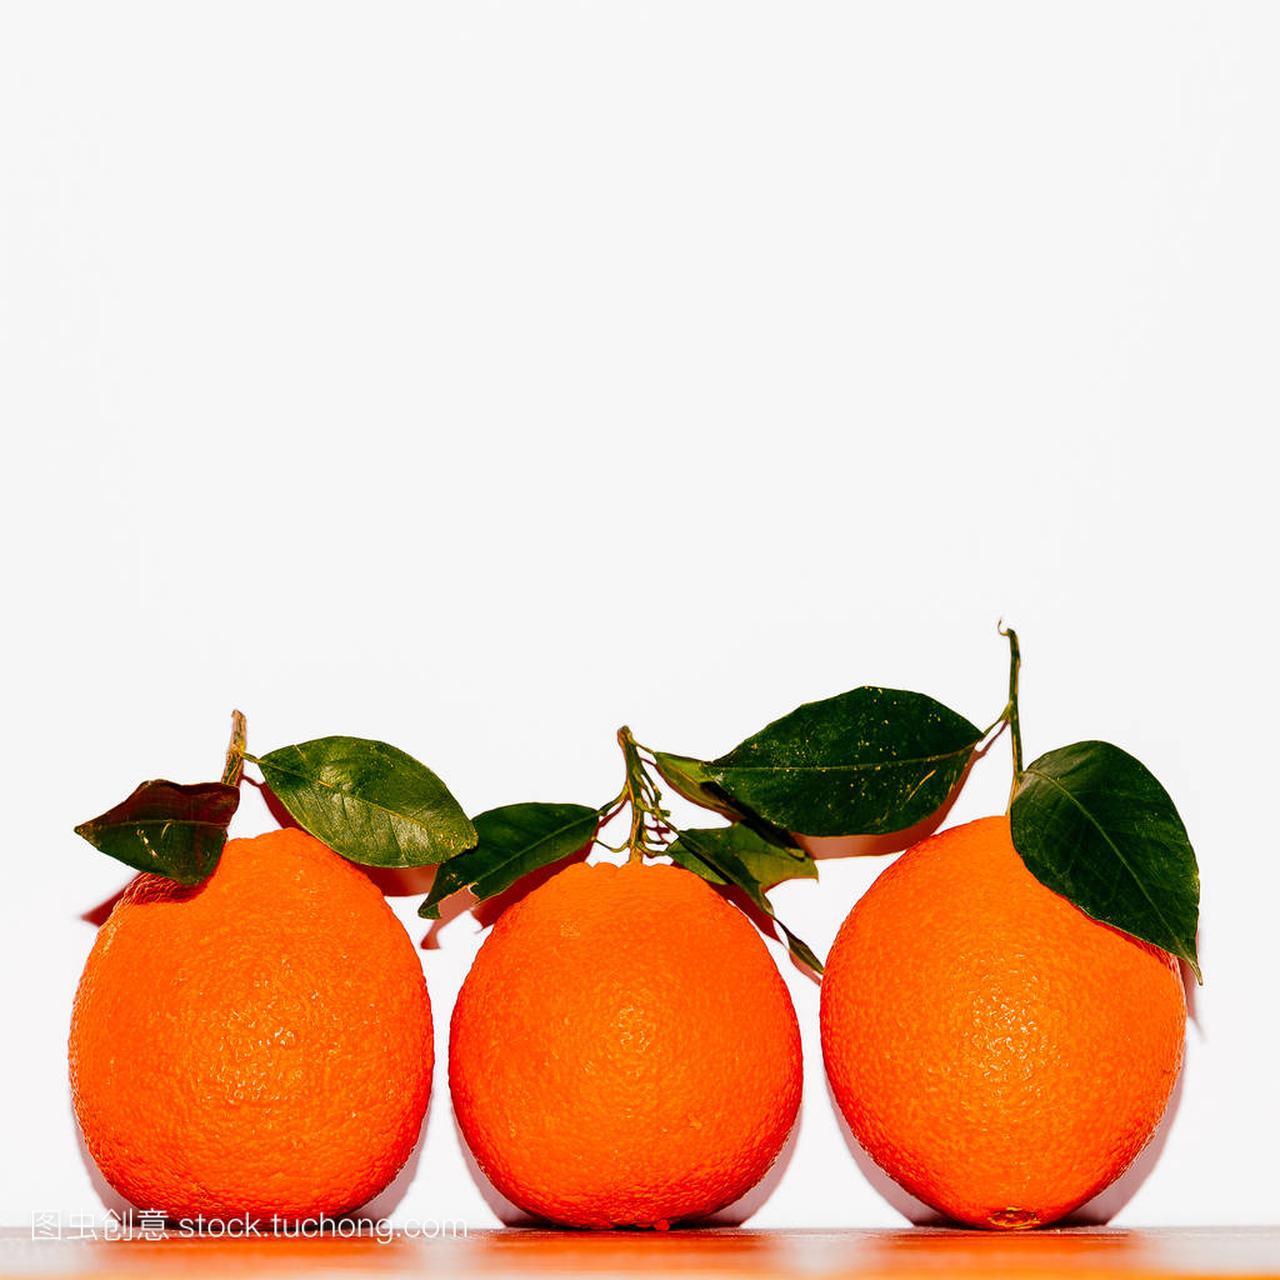 Fresh Oranges on a white wall background